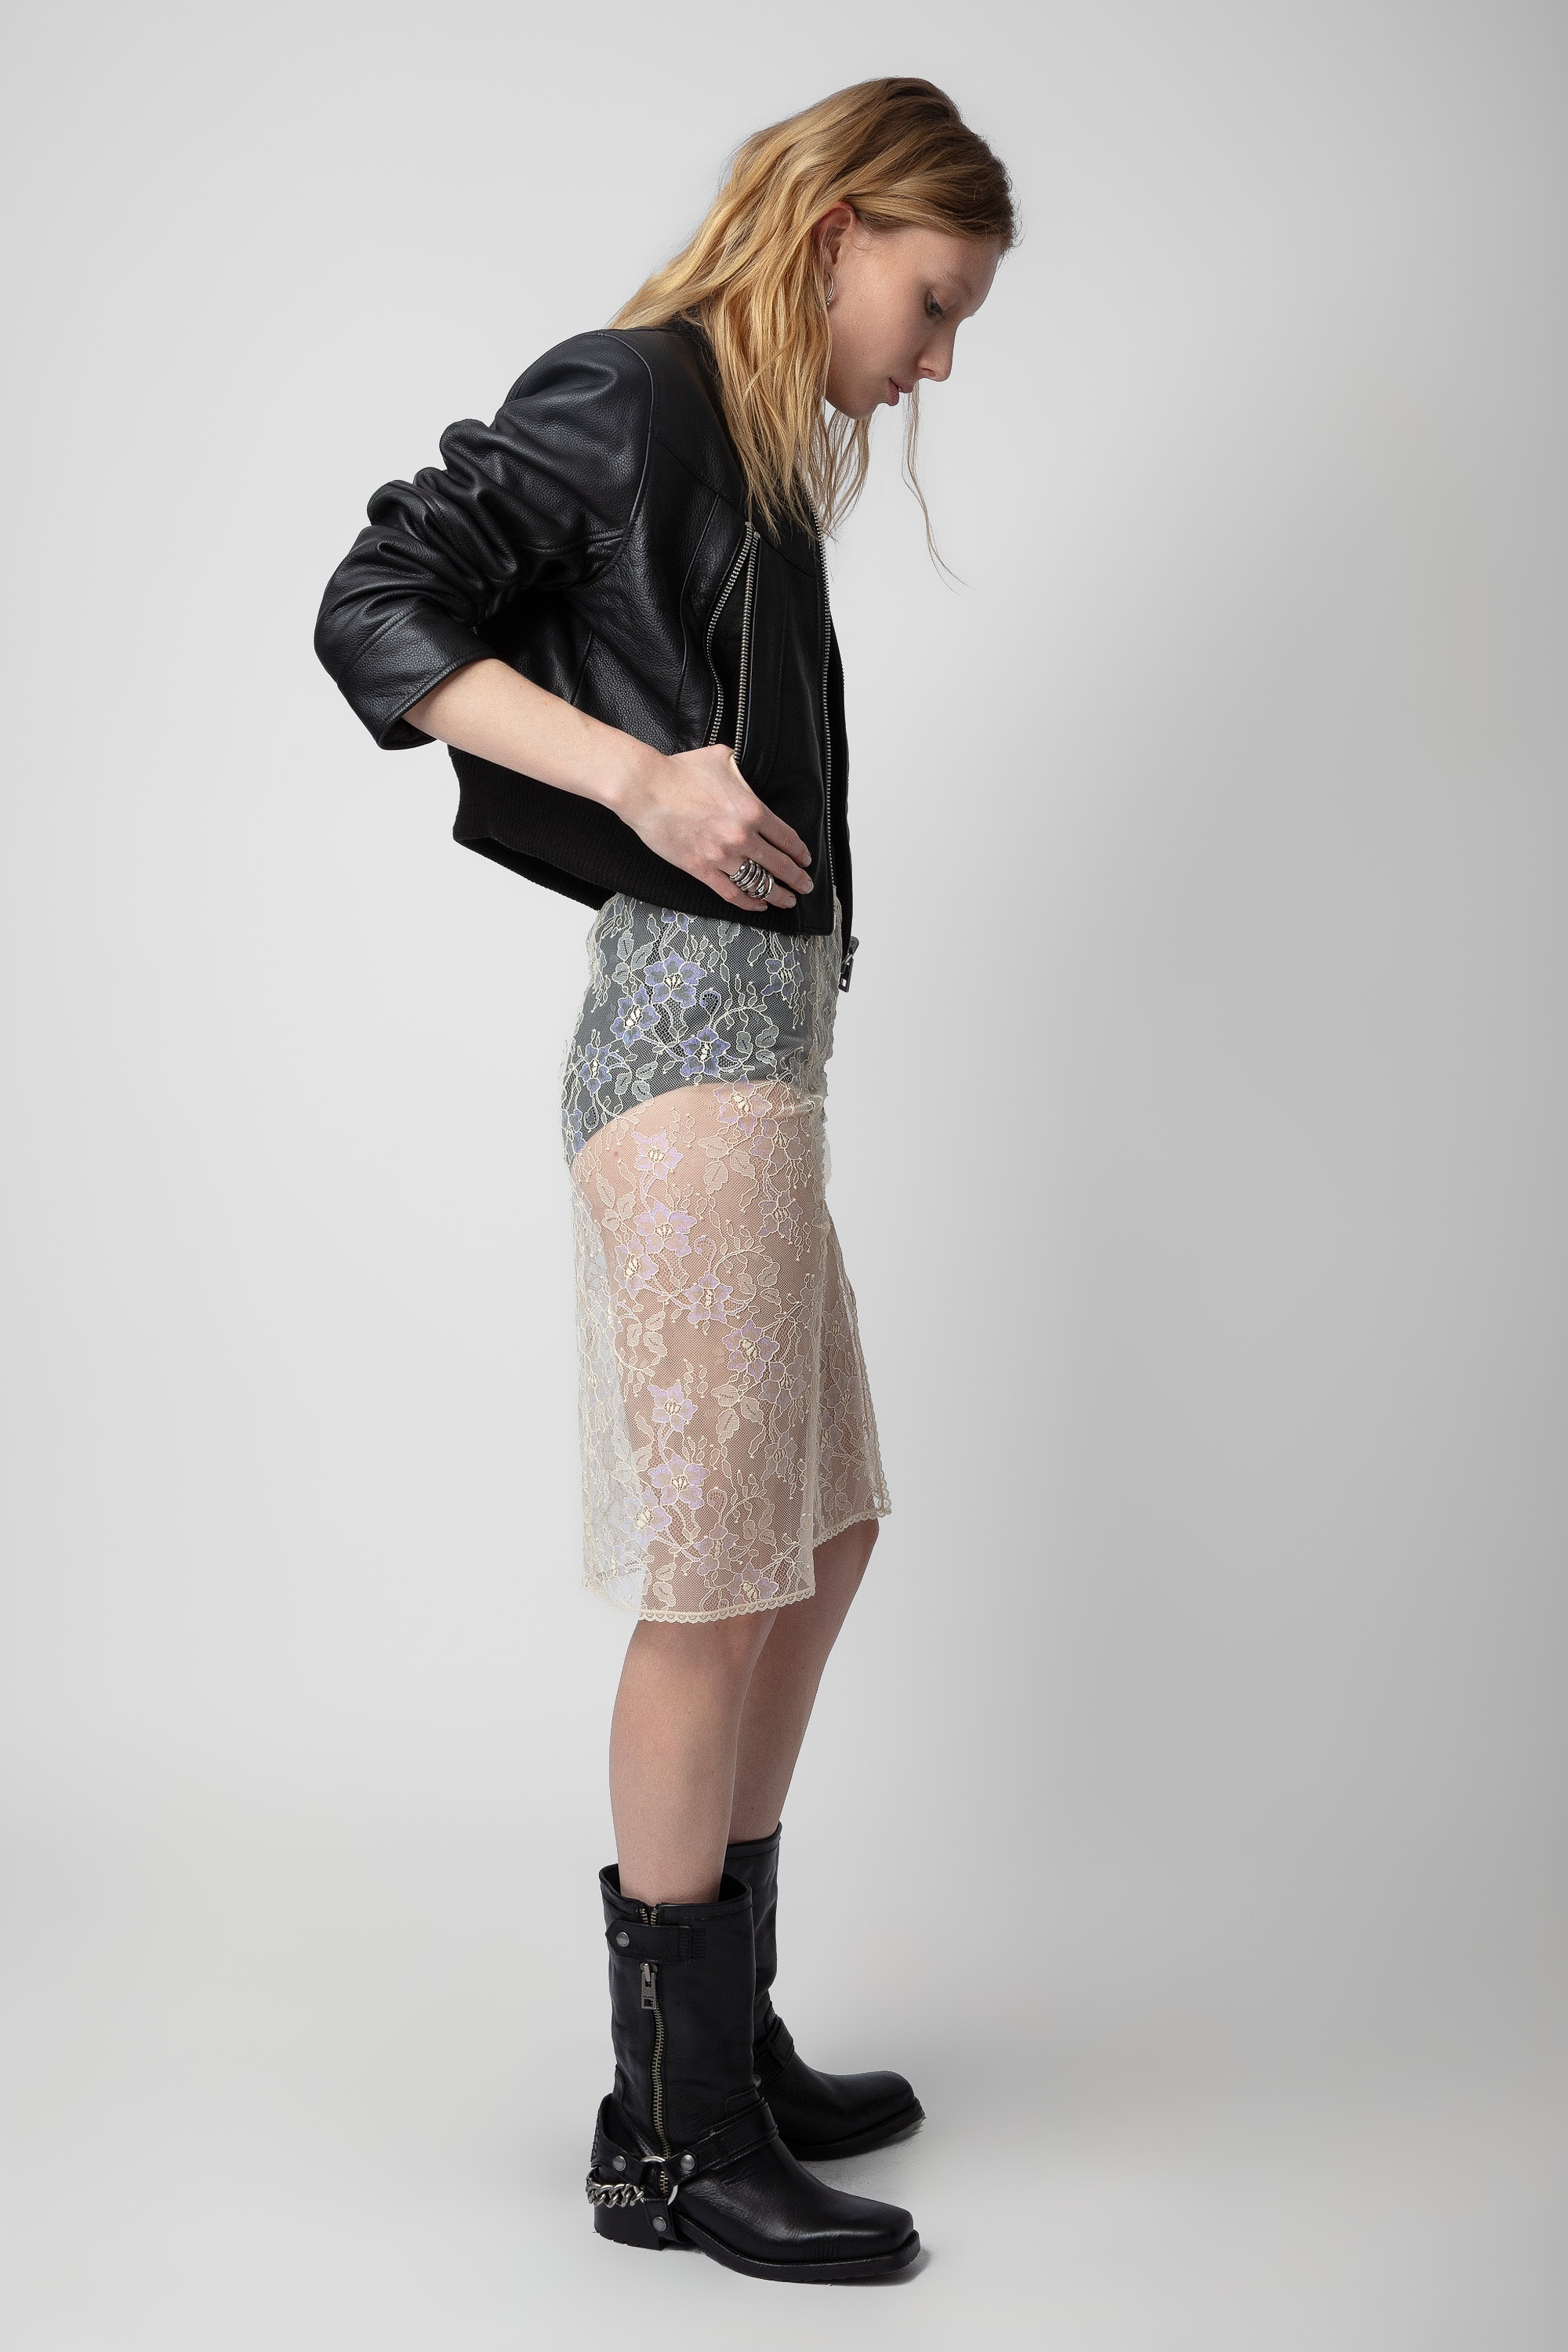 Justicia Skirt - 4